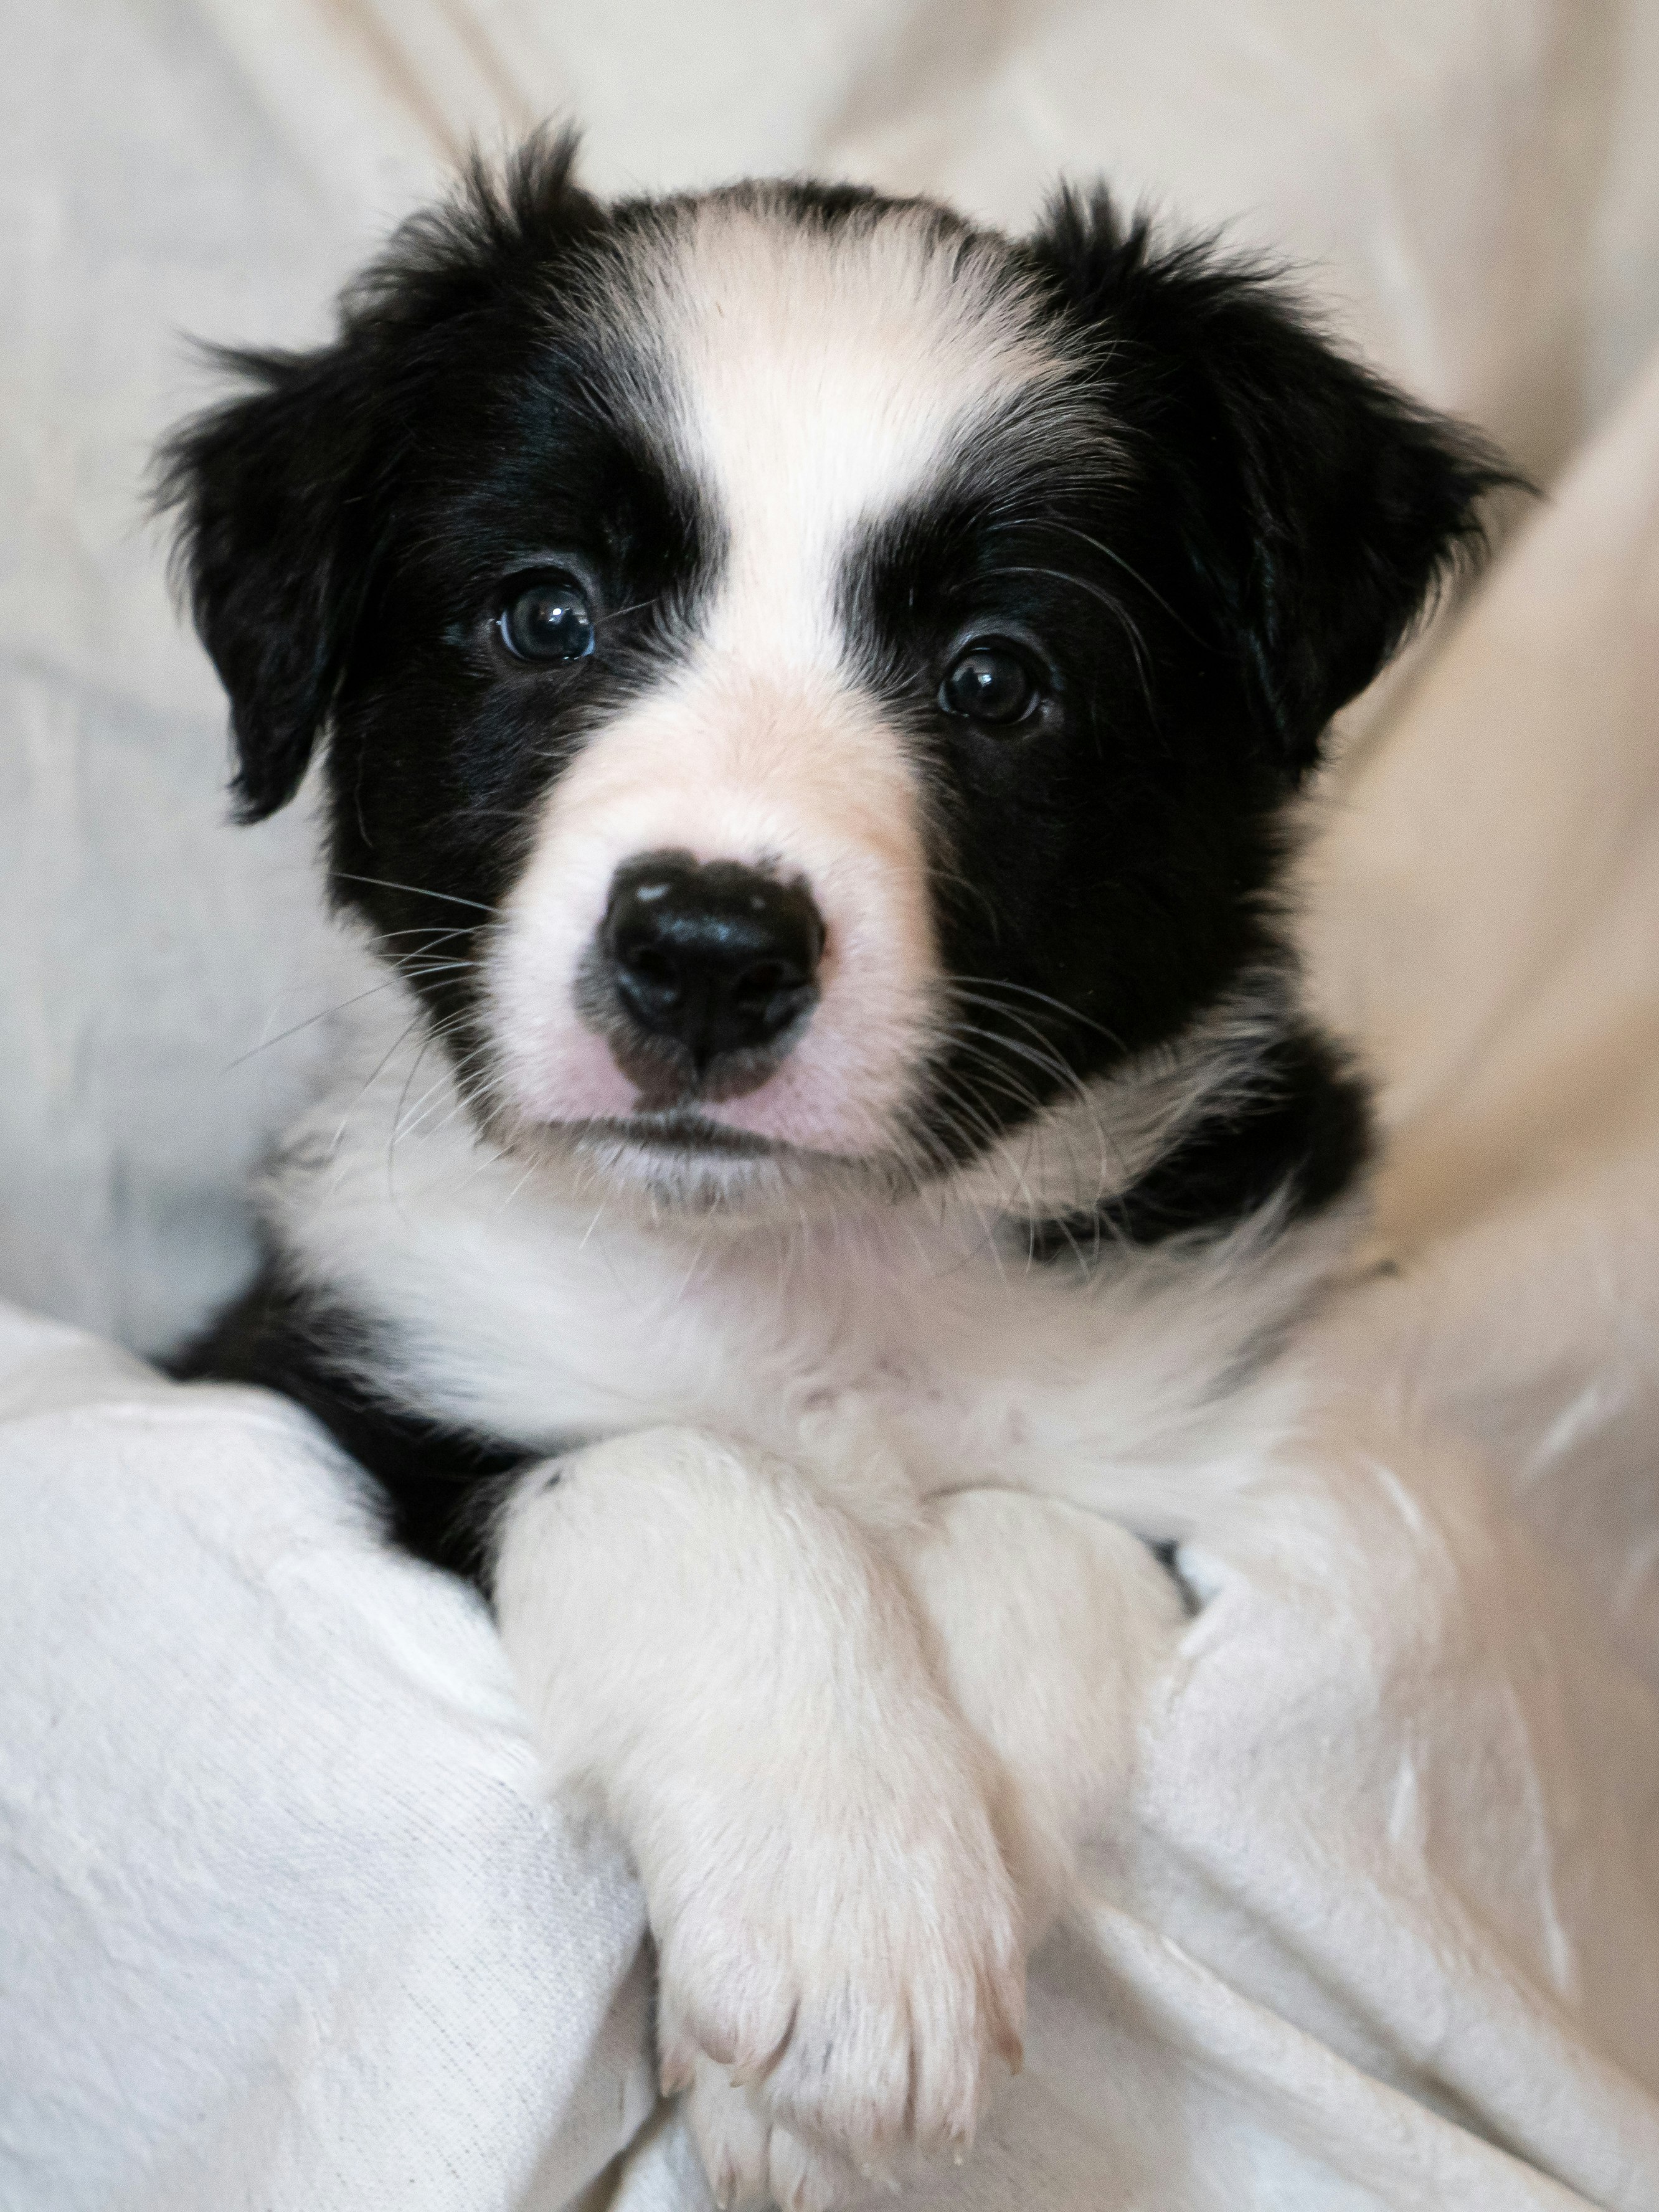 The Short Hair Border Collie: A Guide to this Popular Breed